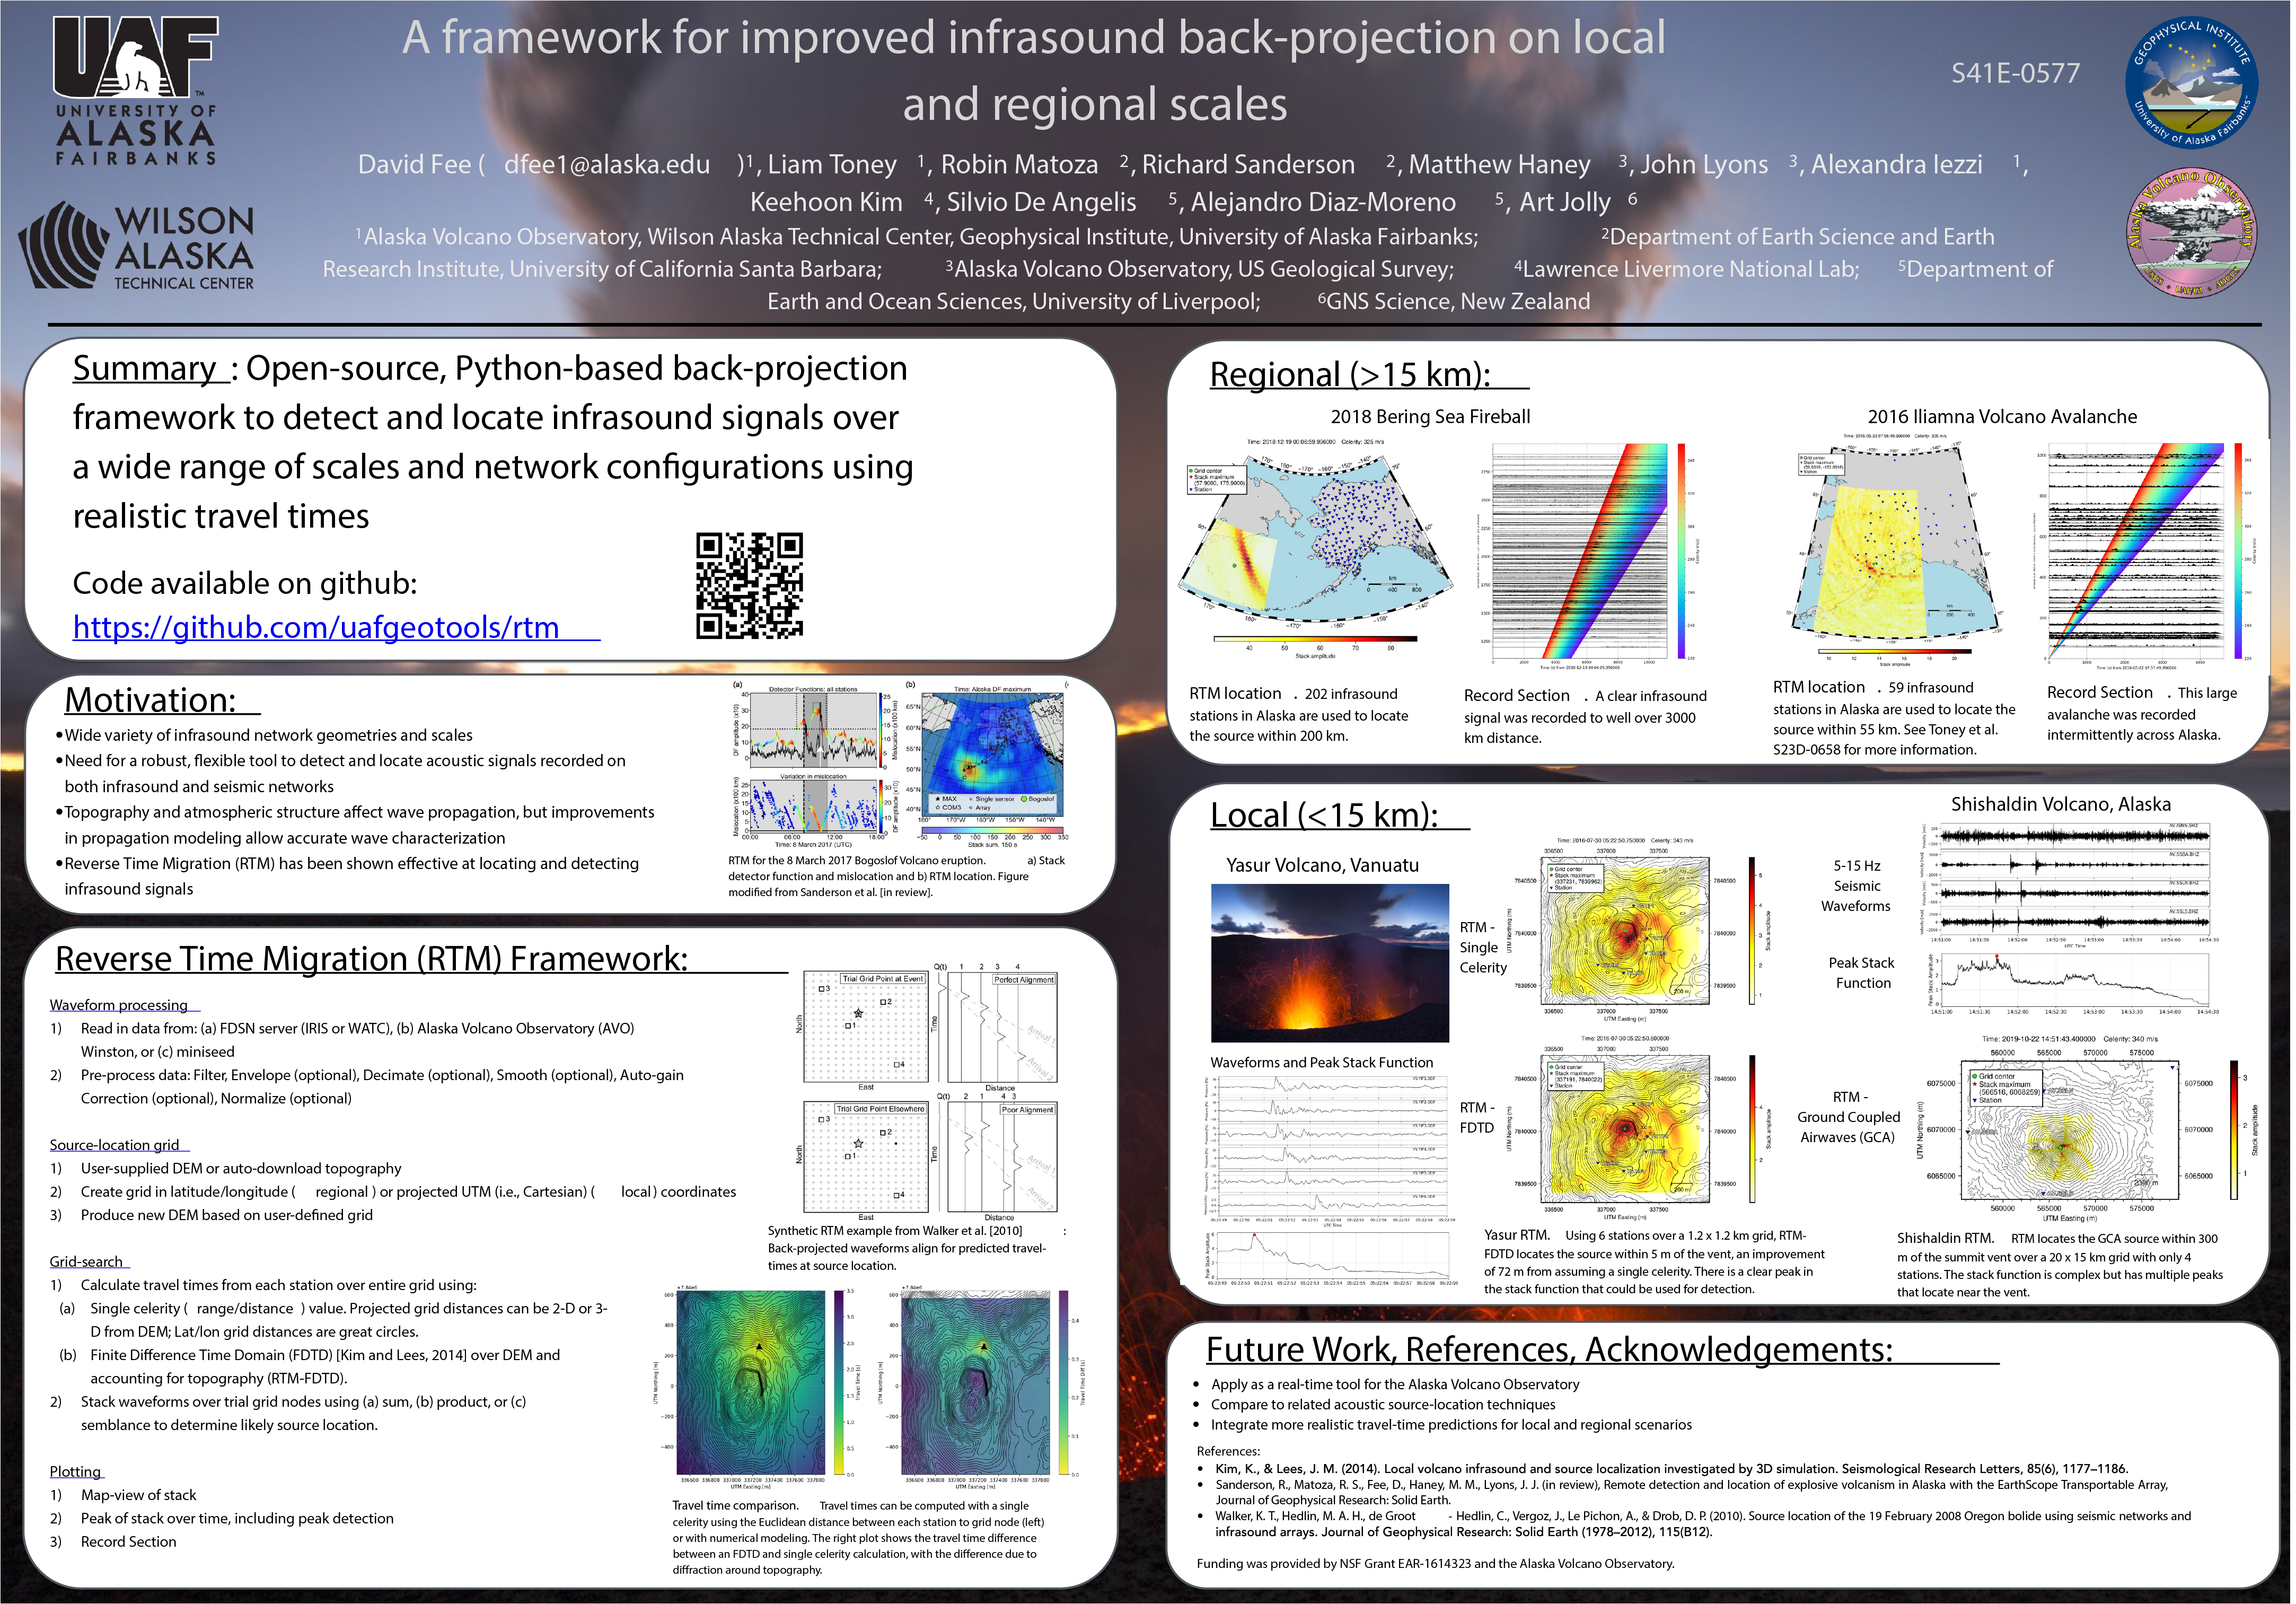 Presented at the 2019 AGU meeting in San Fransisco